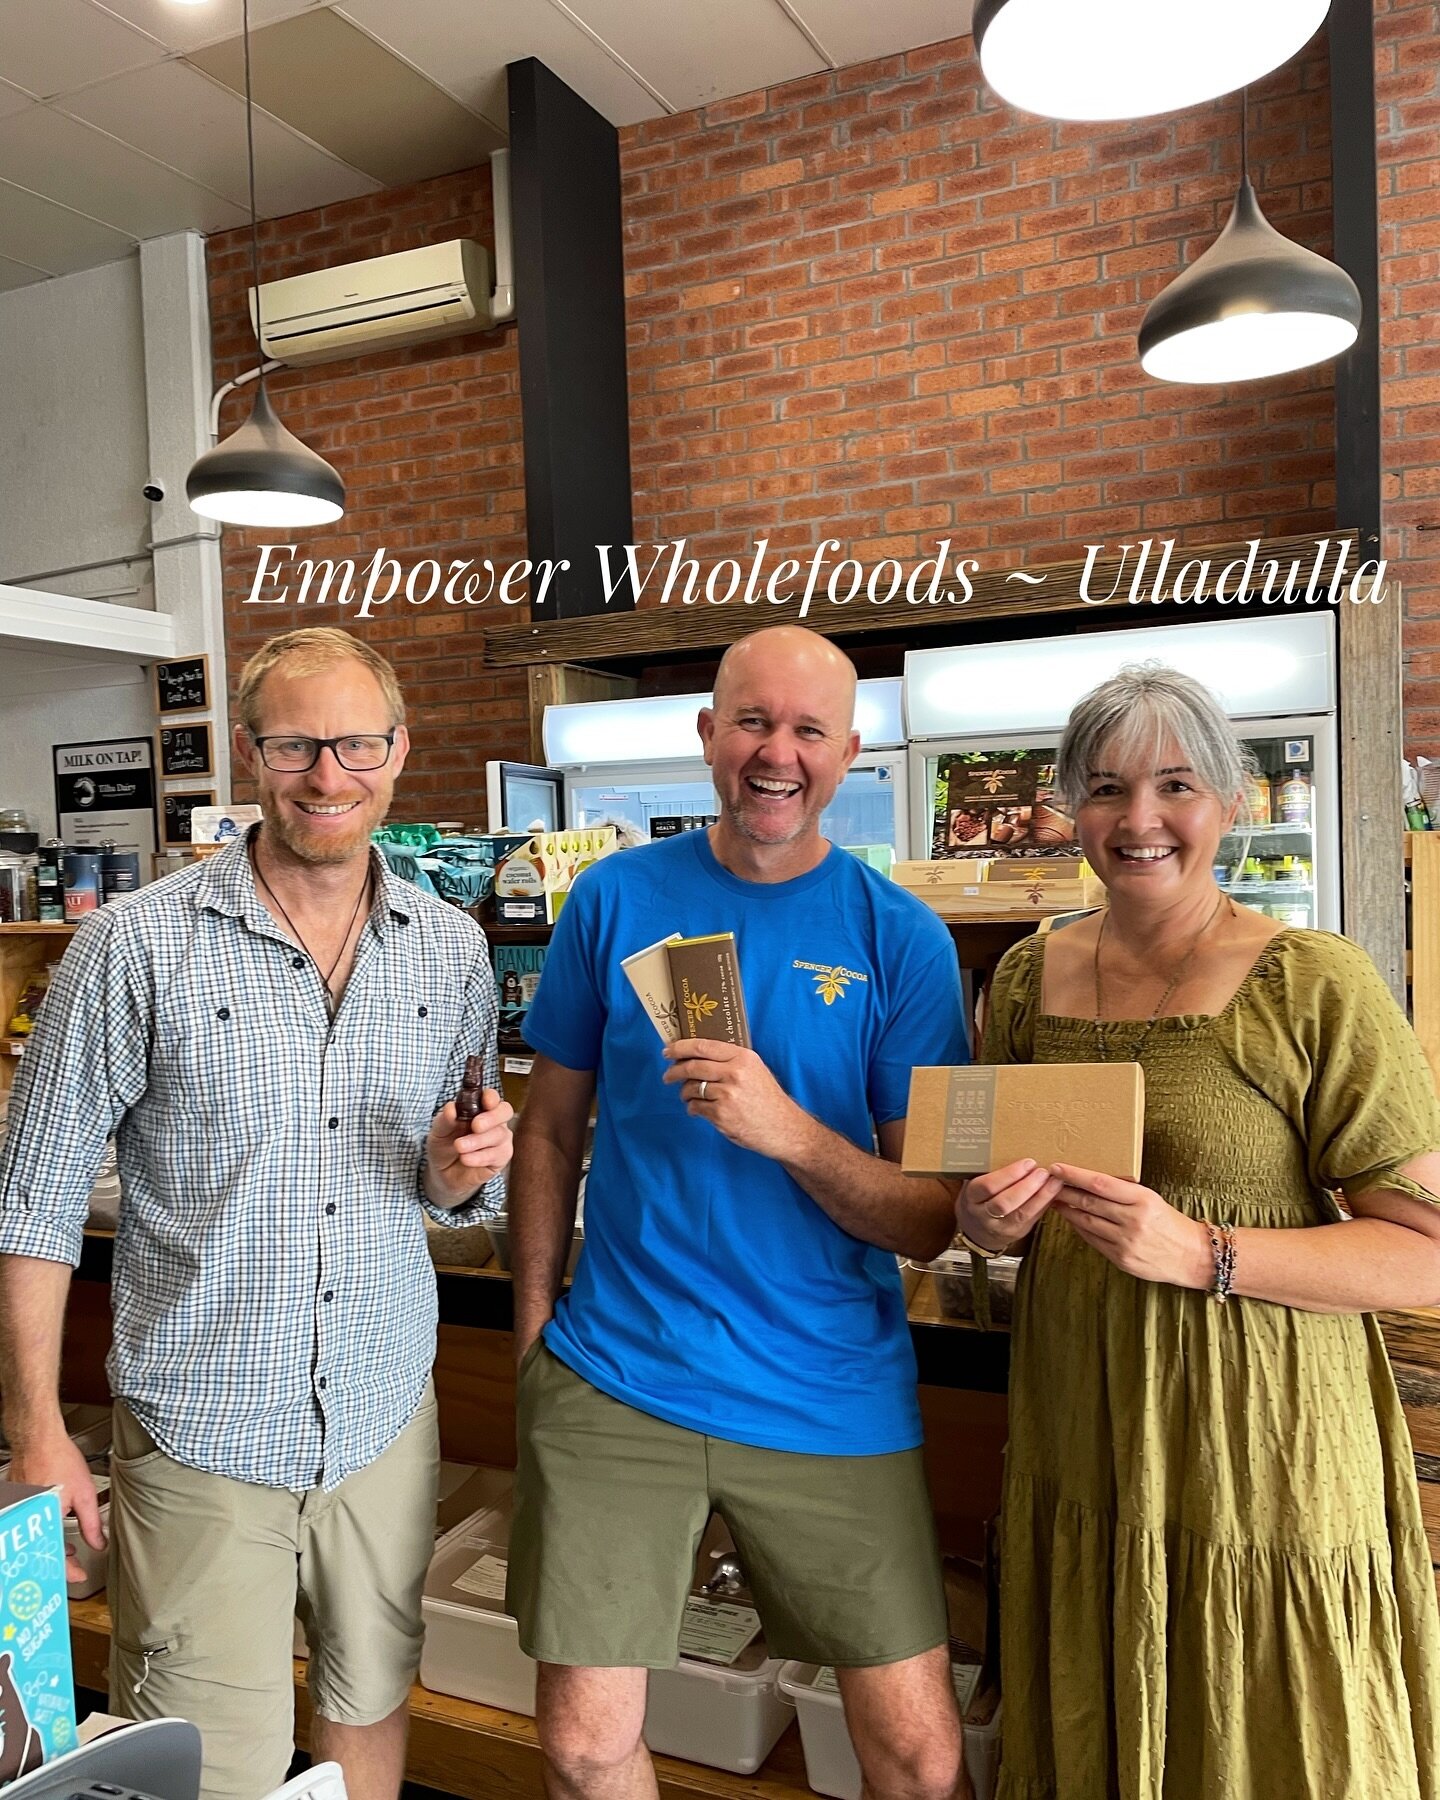 From one of our oldest stockists, to our newest! 
Great to see Melissa and Justin of @empowerwholefoods Ulladulla, who took us onboard late last year 🍫🍫🍫 
An inspiring family run business strengthening health, sustainability and community in Ullad